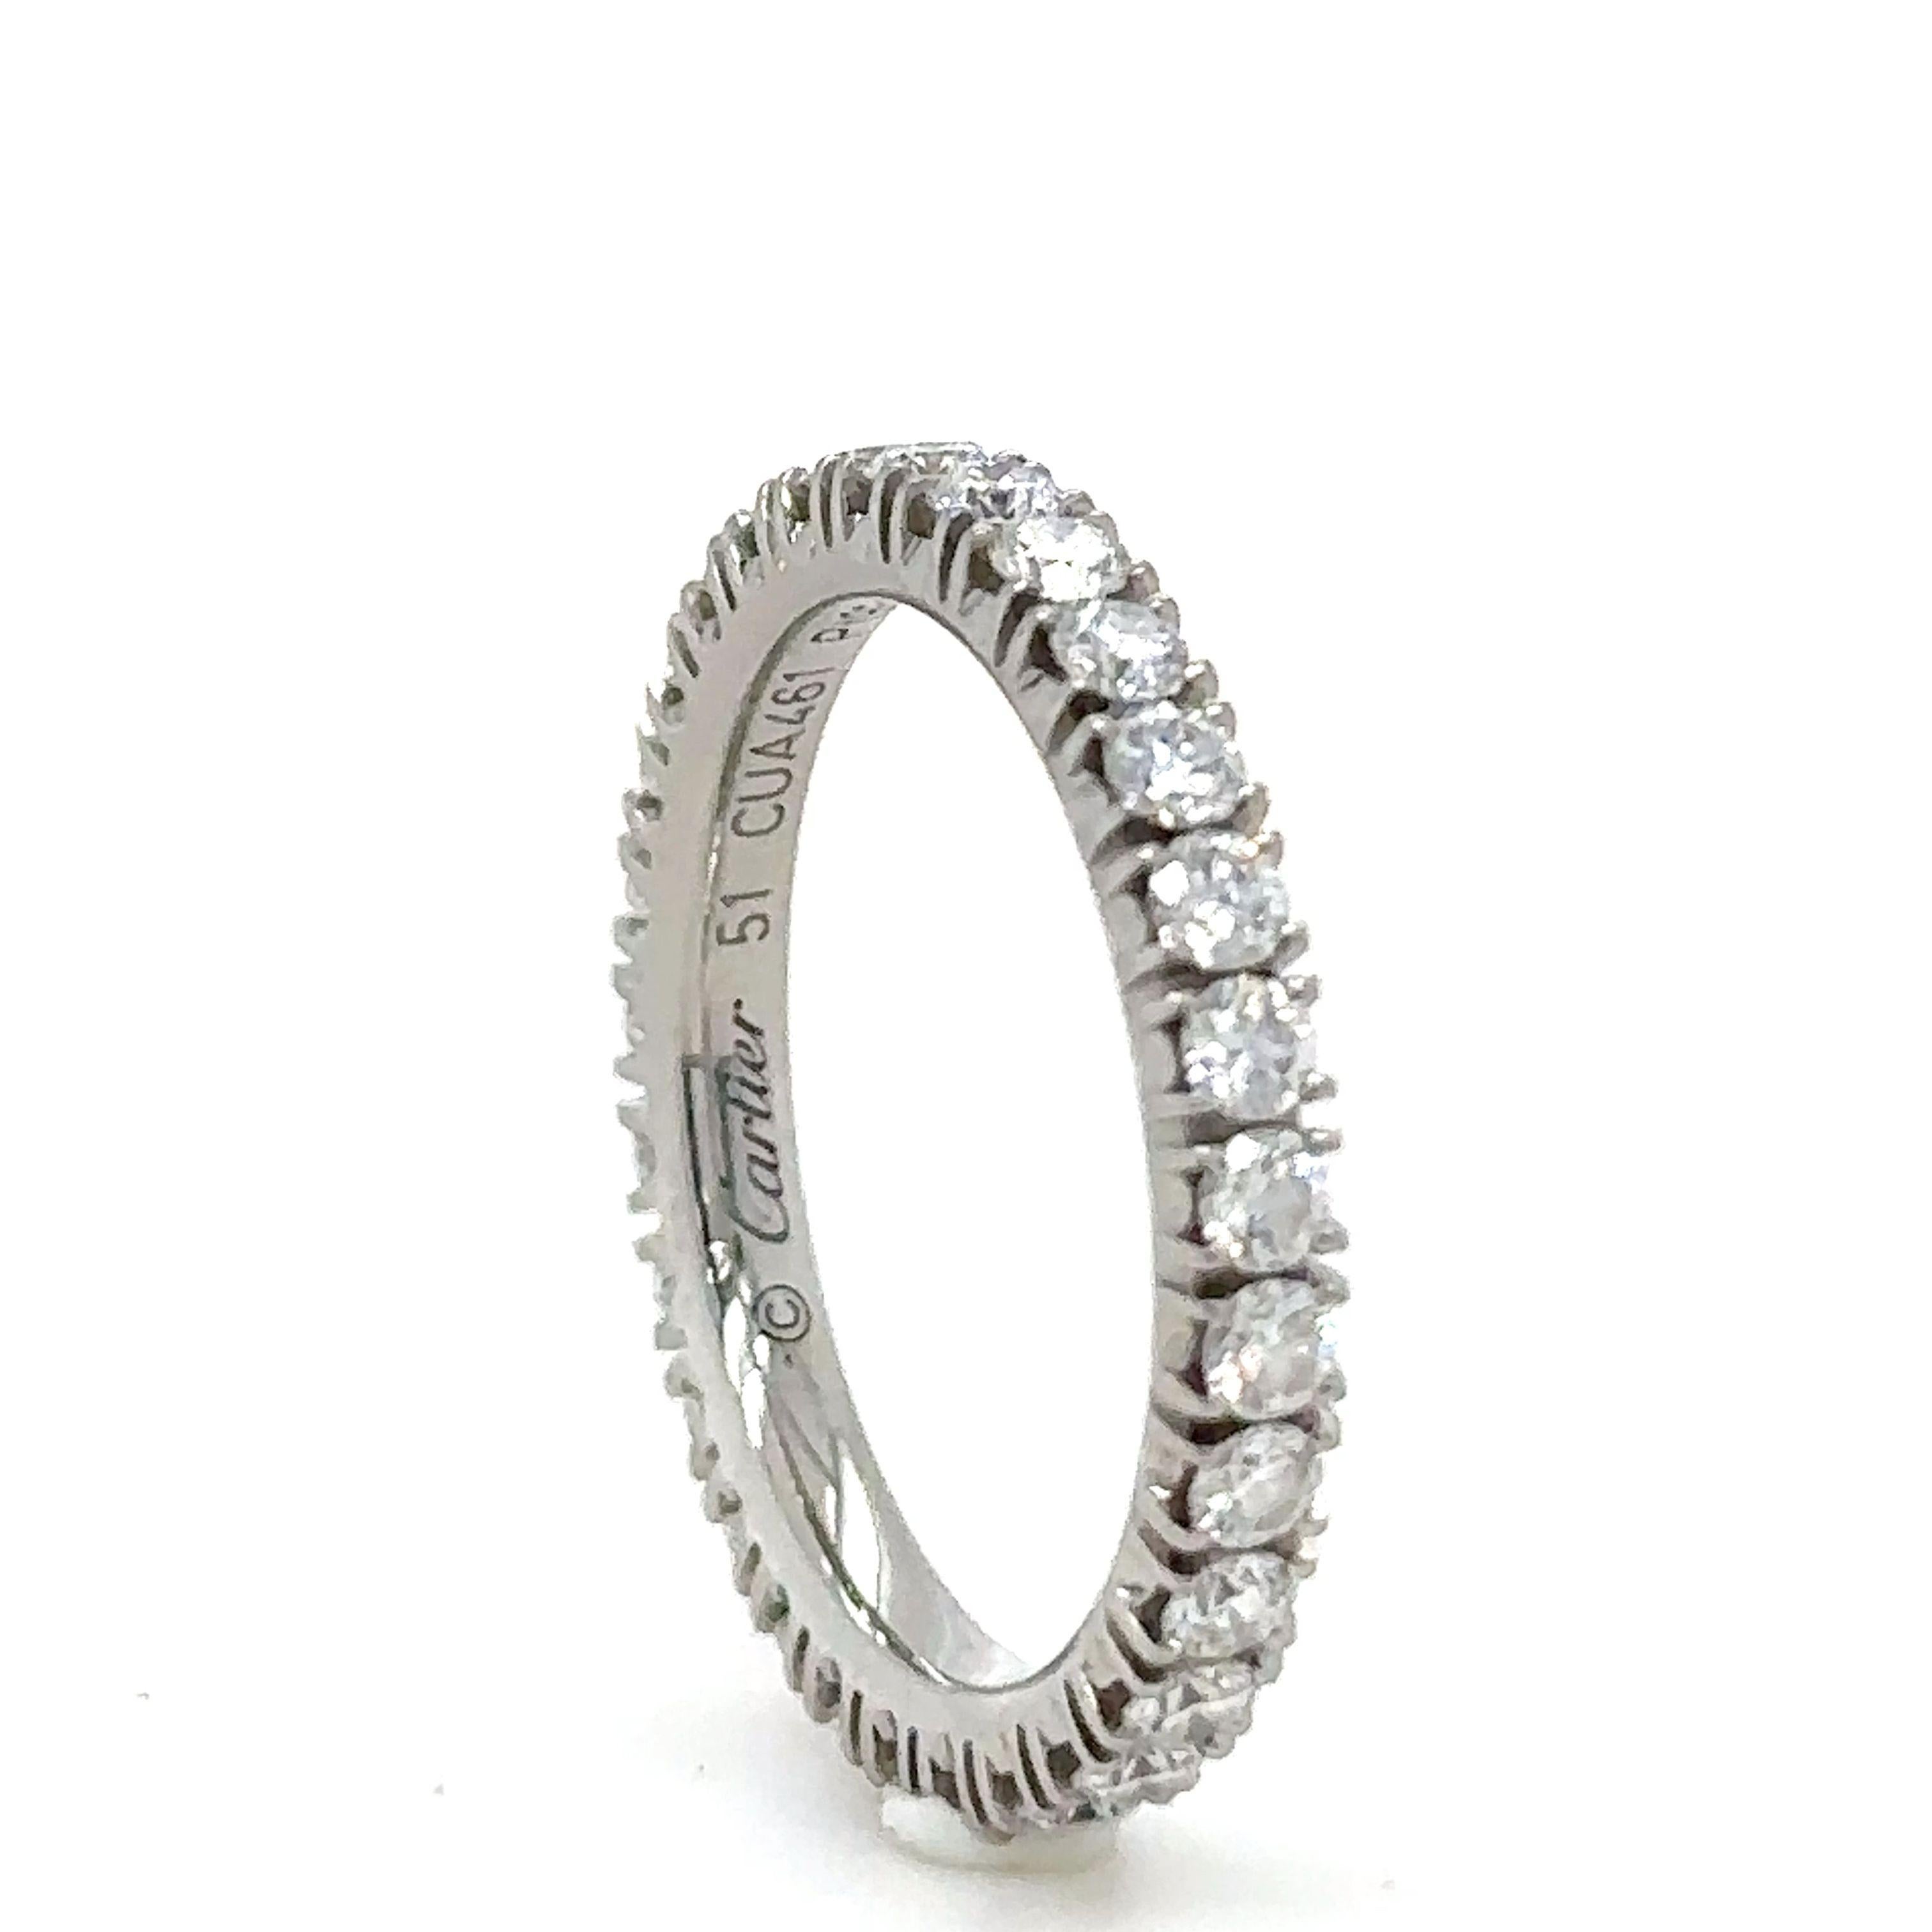 A Cartier Étincelle Diamond Full Circle Wedding Ring, with 29 round brilliant cut diamonds claw set in platinum on a 2.6mm band.

Diamonds 29 = 0.94ct

Metal: 950 Platinum
Carat: 0.94ct
Colour: N/A
Clarity:  N/A
Cut: Round Brilliant Cut
Weight: 3.47